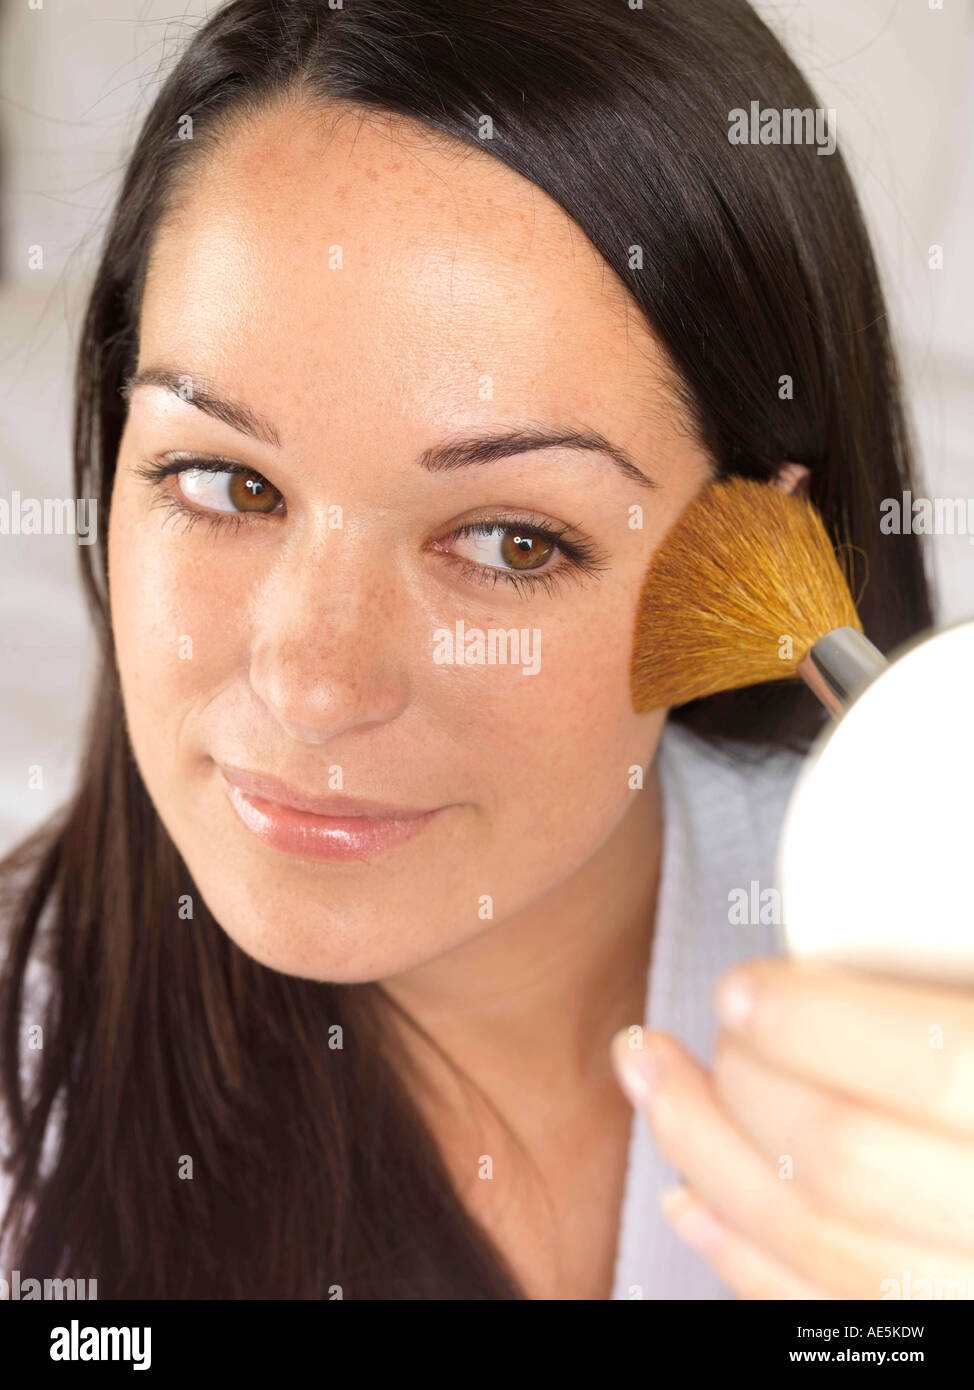 Young Woman Applying Blusher Model Released Stock Photo